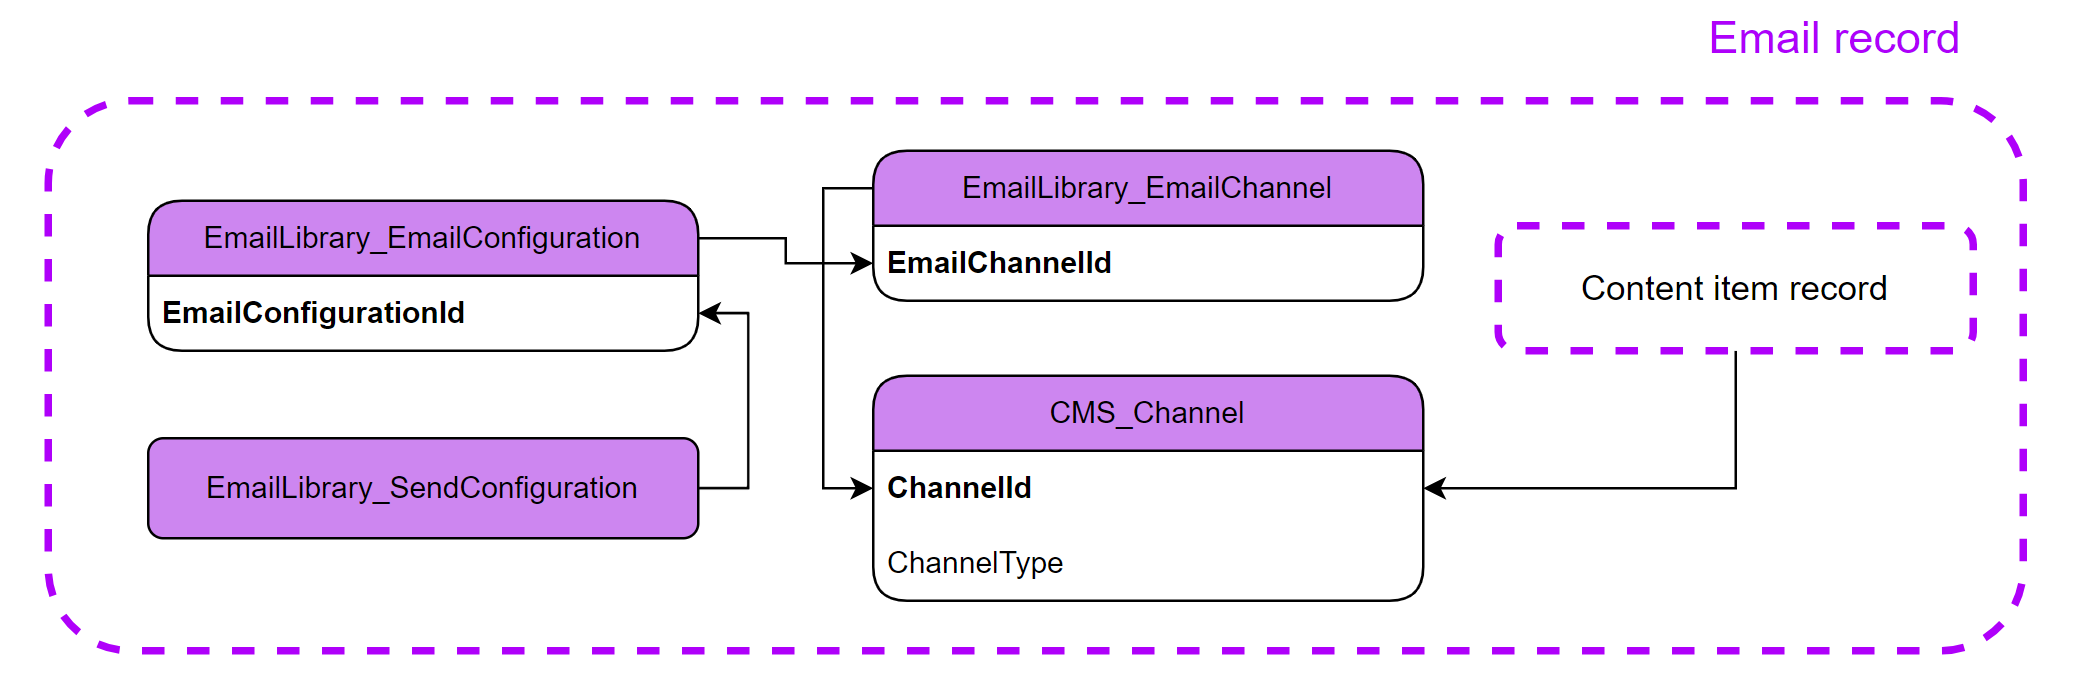 Email content item database entity composition